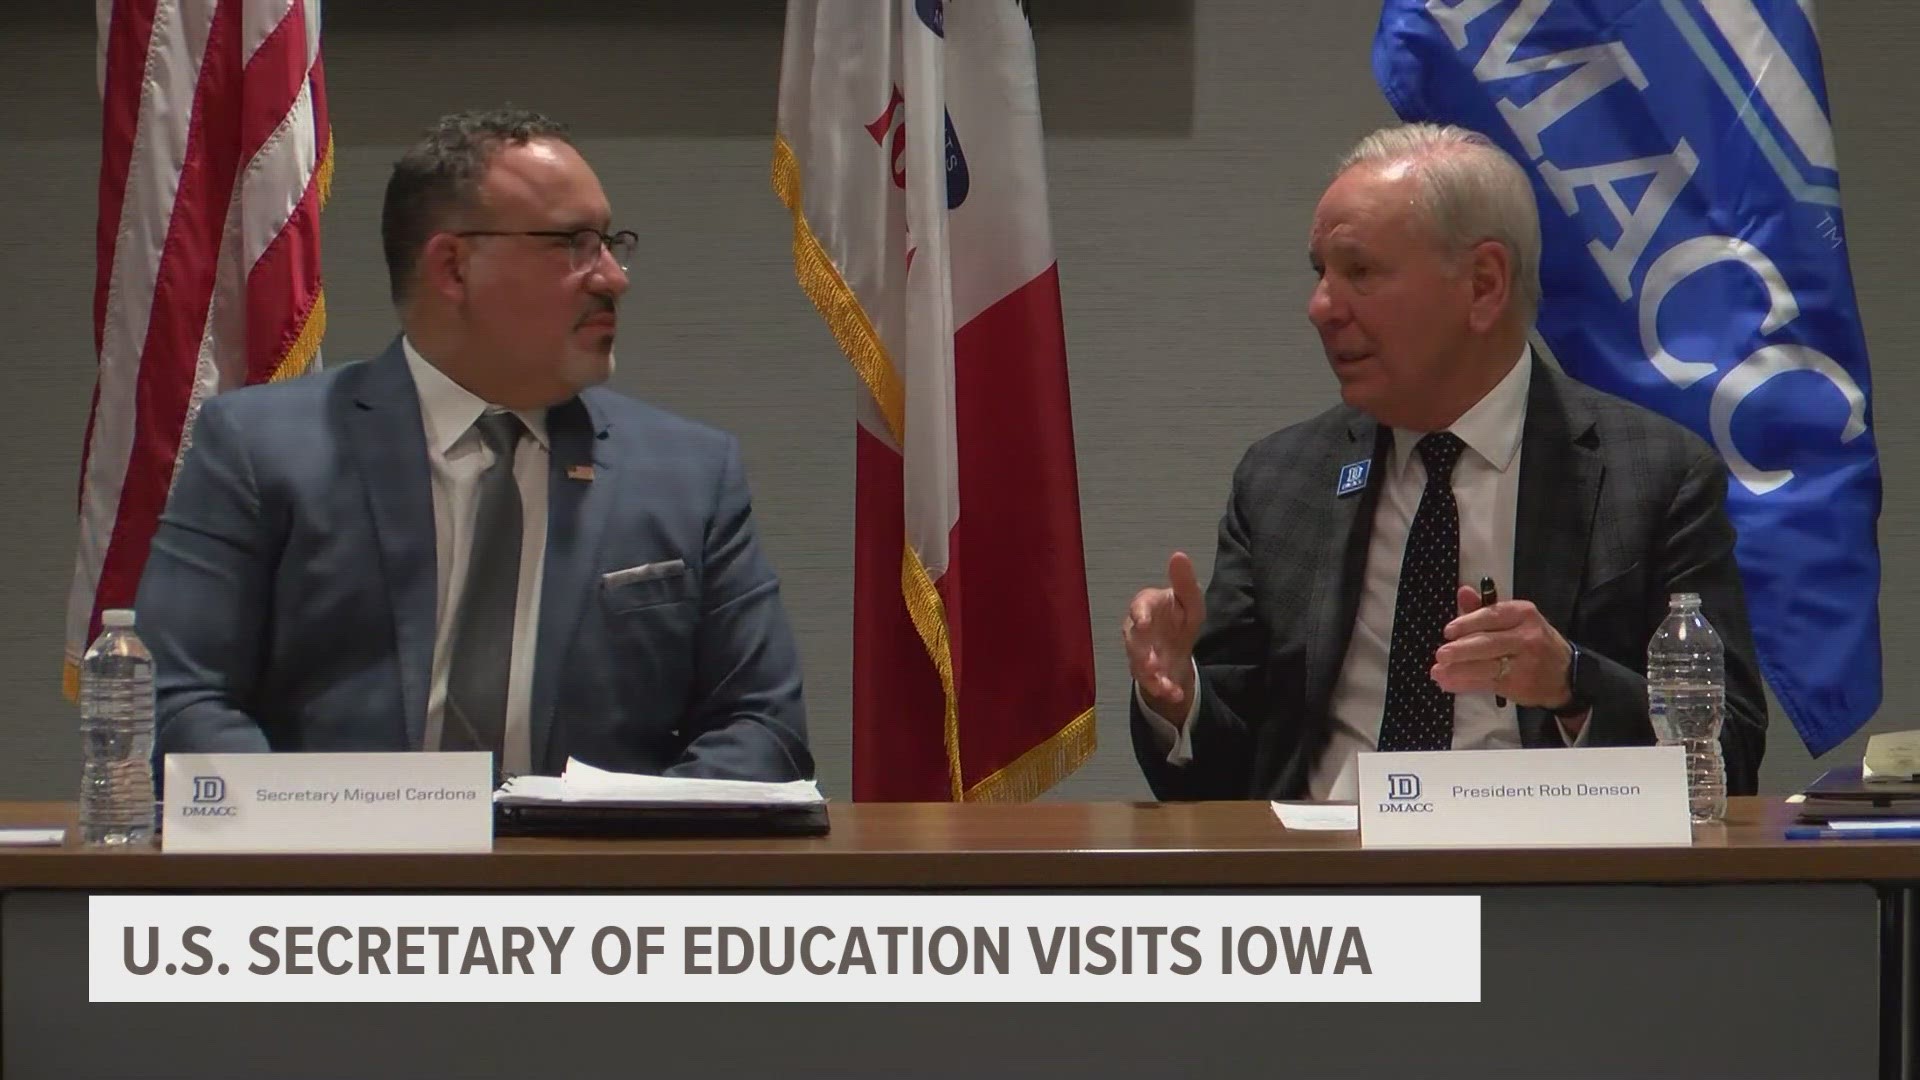 Secretary of Education Miguel Cardona discussed the recent loan cancellations, as well as topics such as teacher apprenticeship programs and rural education.